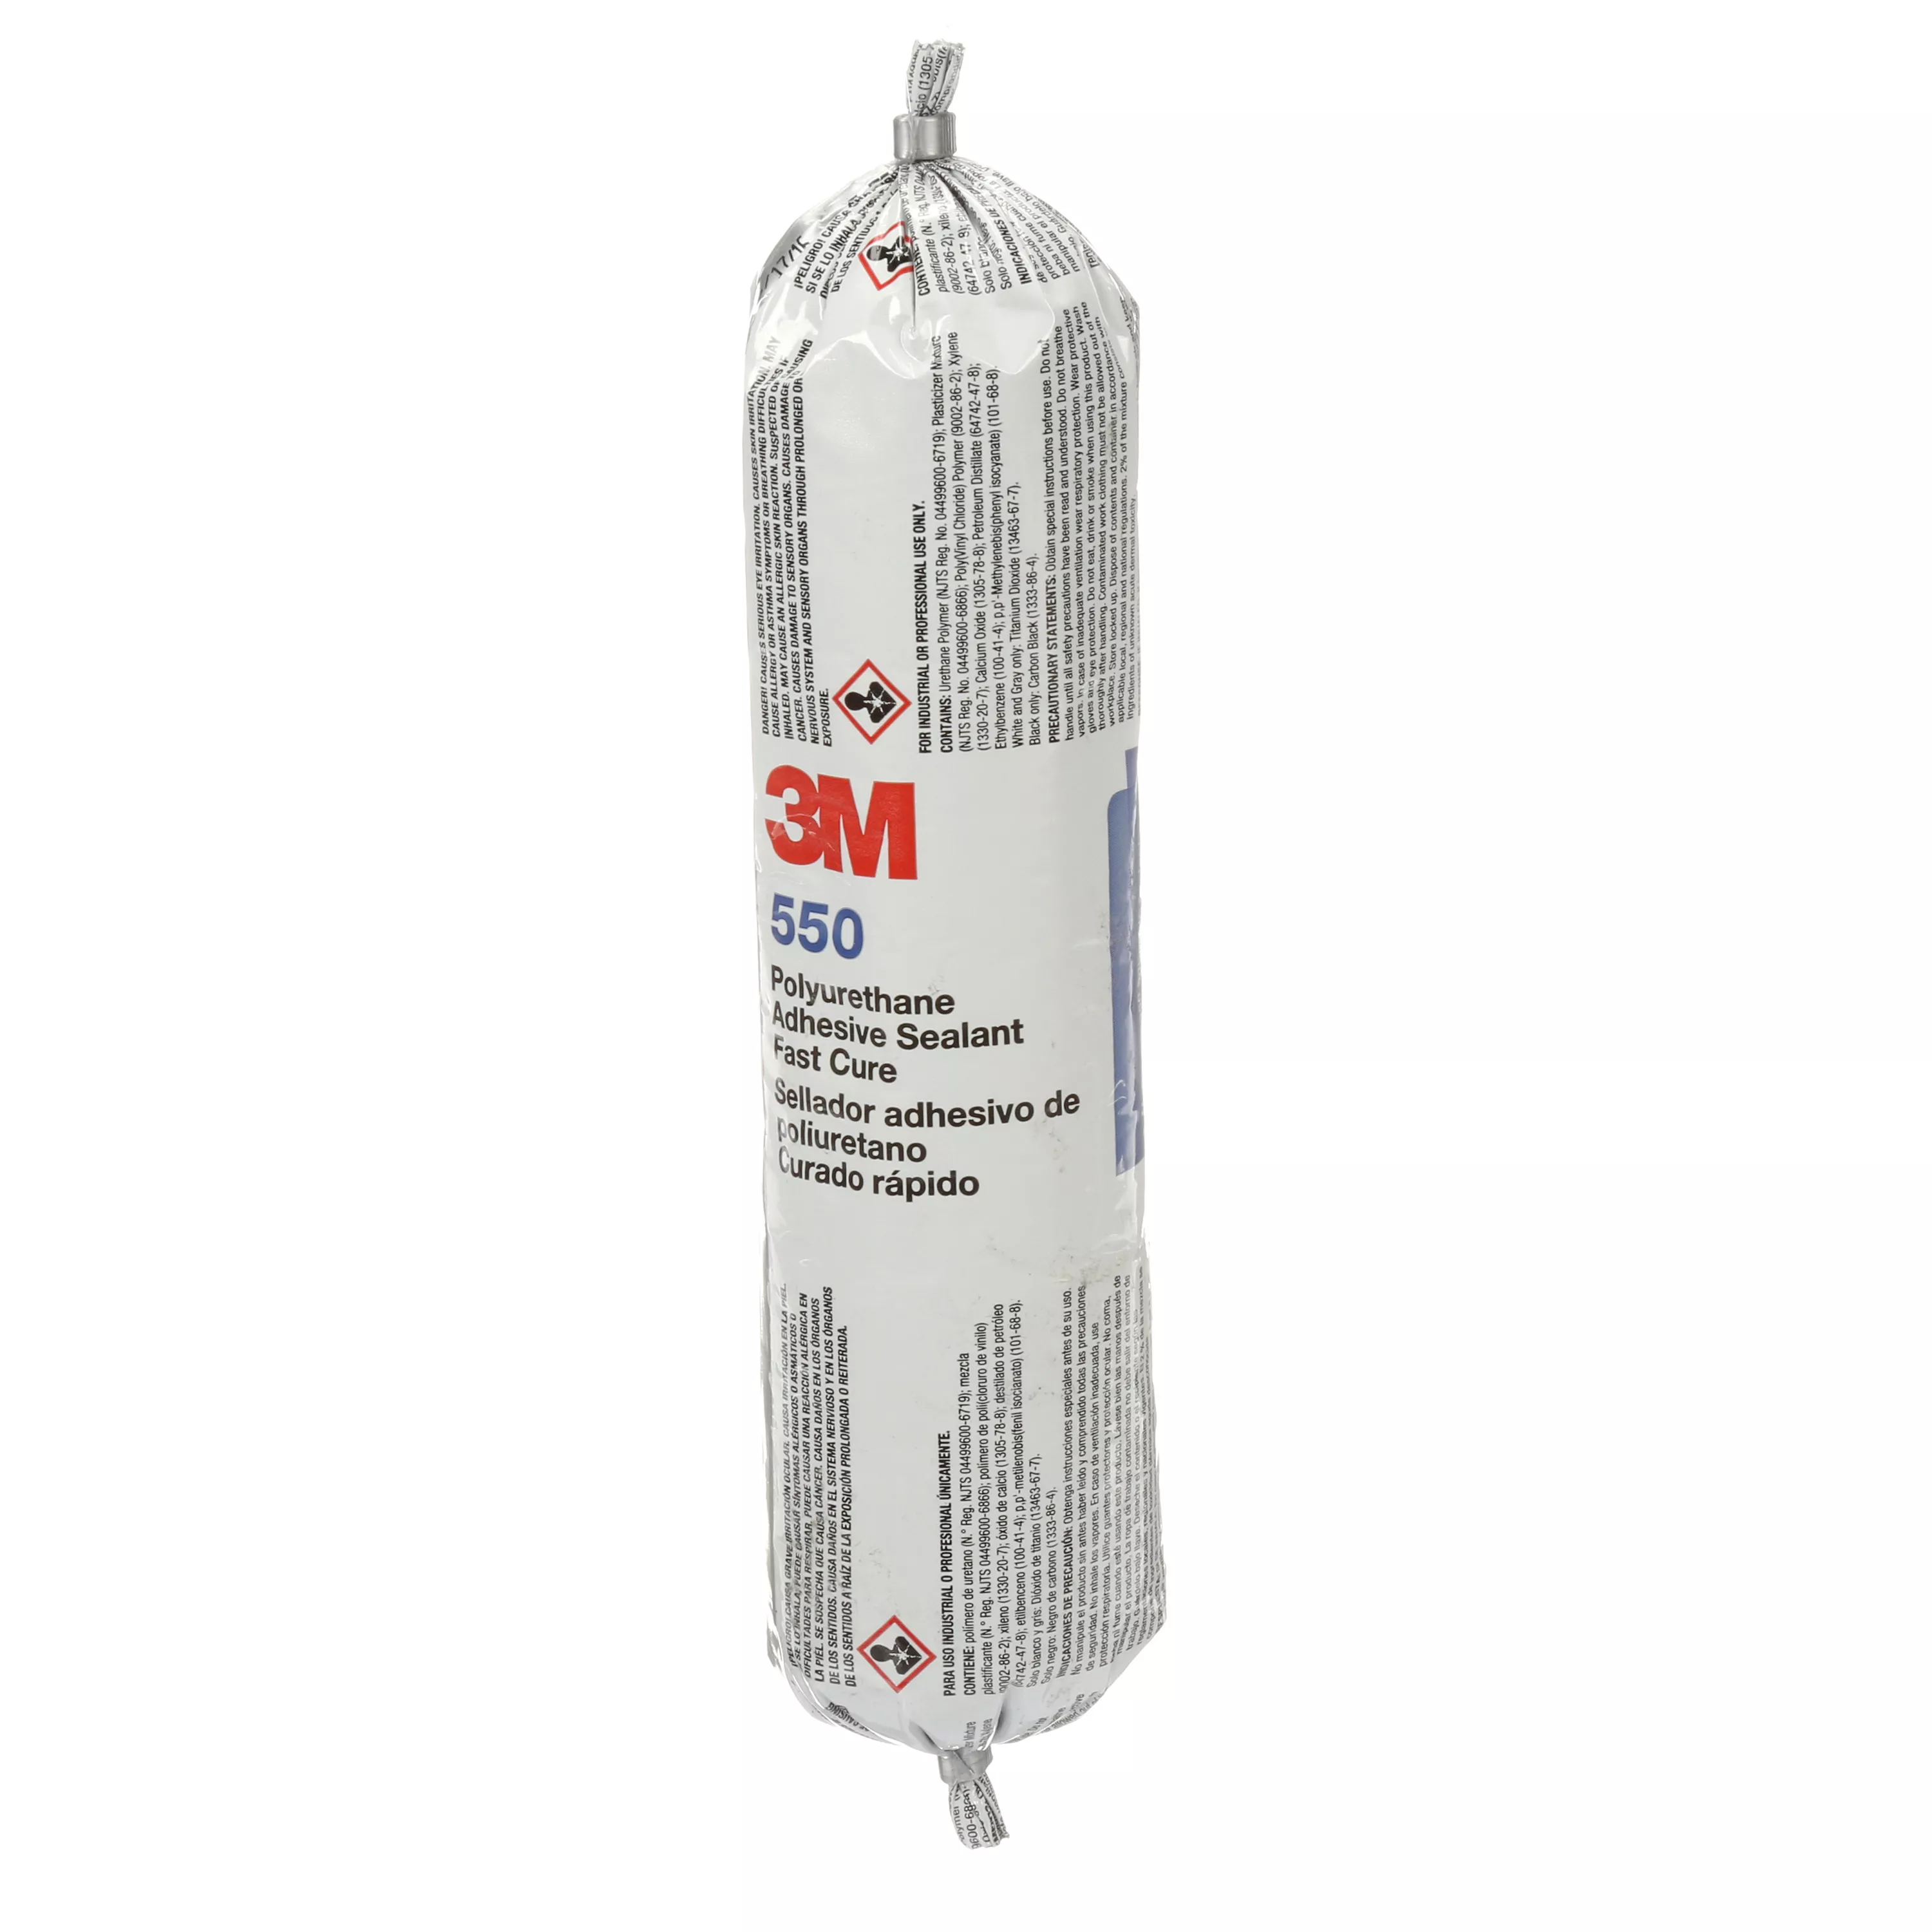 3M™ Polyurethane Adhesive Sealant 550FC, Fast Cure, Gray, Use with
400A-2K APR, Nozzles Not Included, 350 mL Sausage Pack, 12/Case